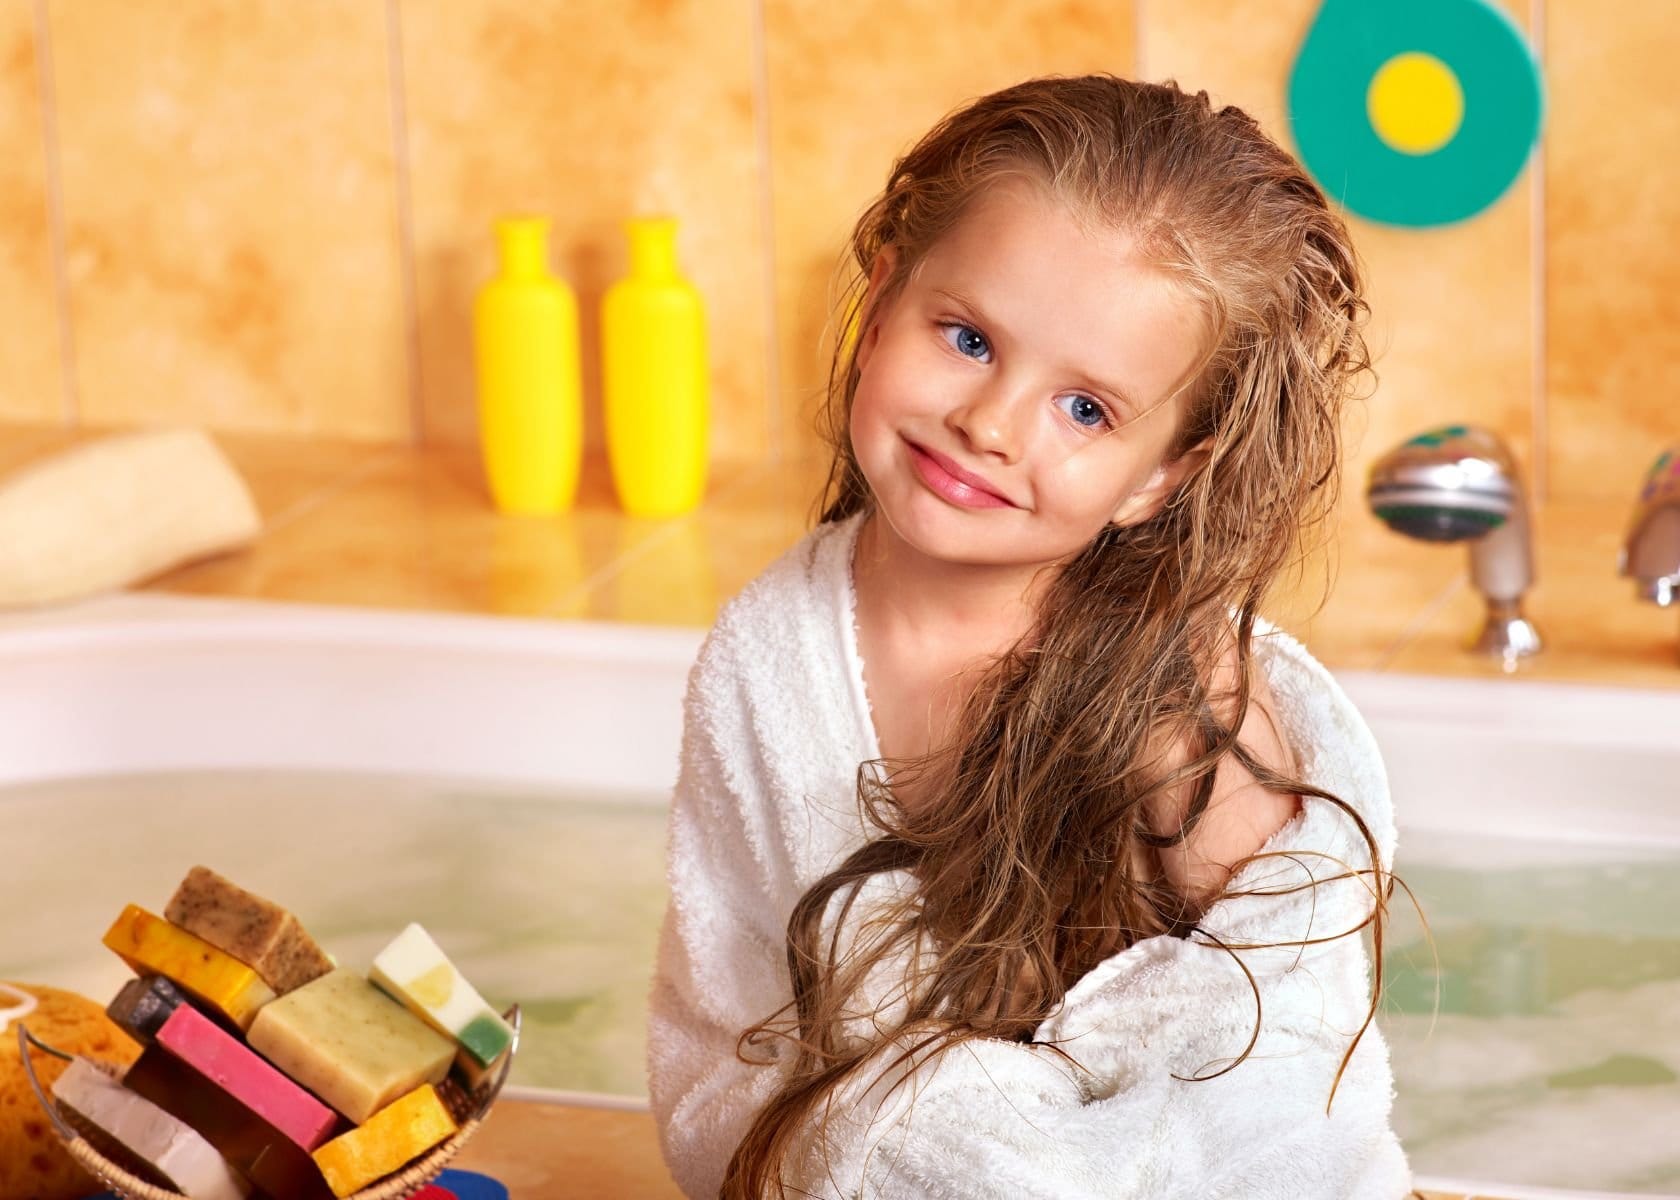 Common Concerns About Using Adult Shampoo on Kids